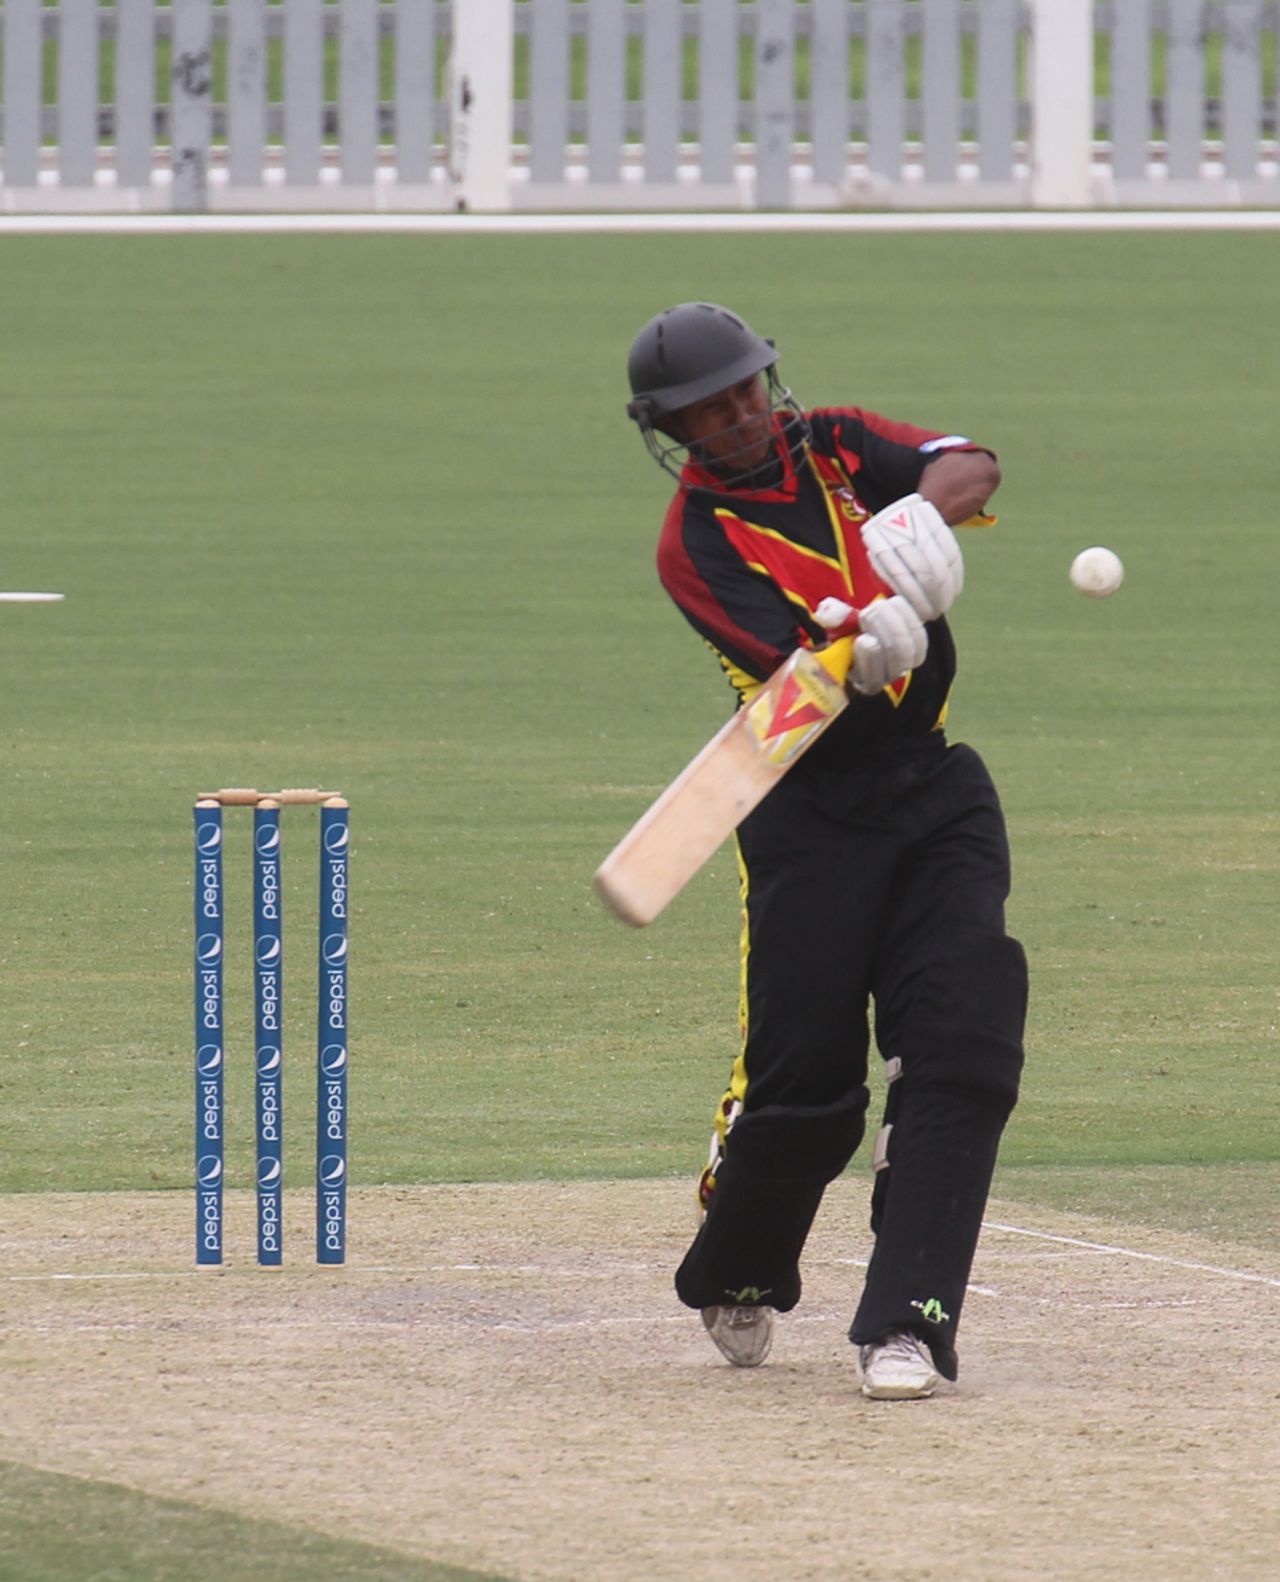 Vani Morea hits a boundary during his unbeaten 74 against Hong Kong in the 3rd/4th Play-off match at the ICC WCL2 in Dubai on 15th April 2011